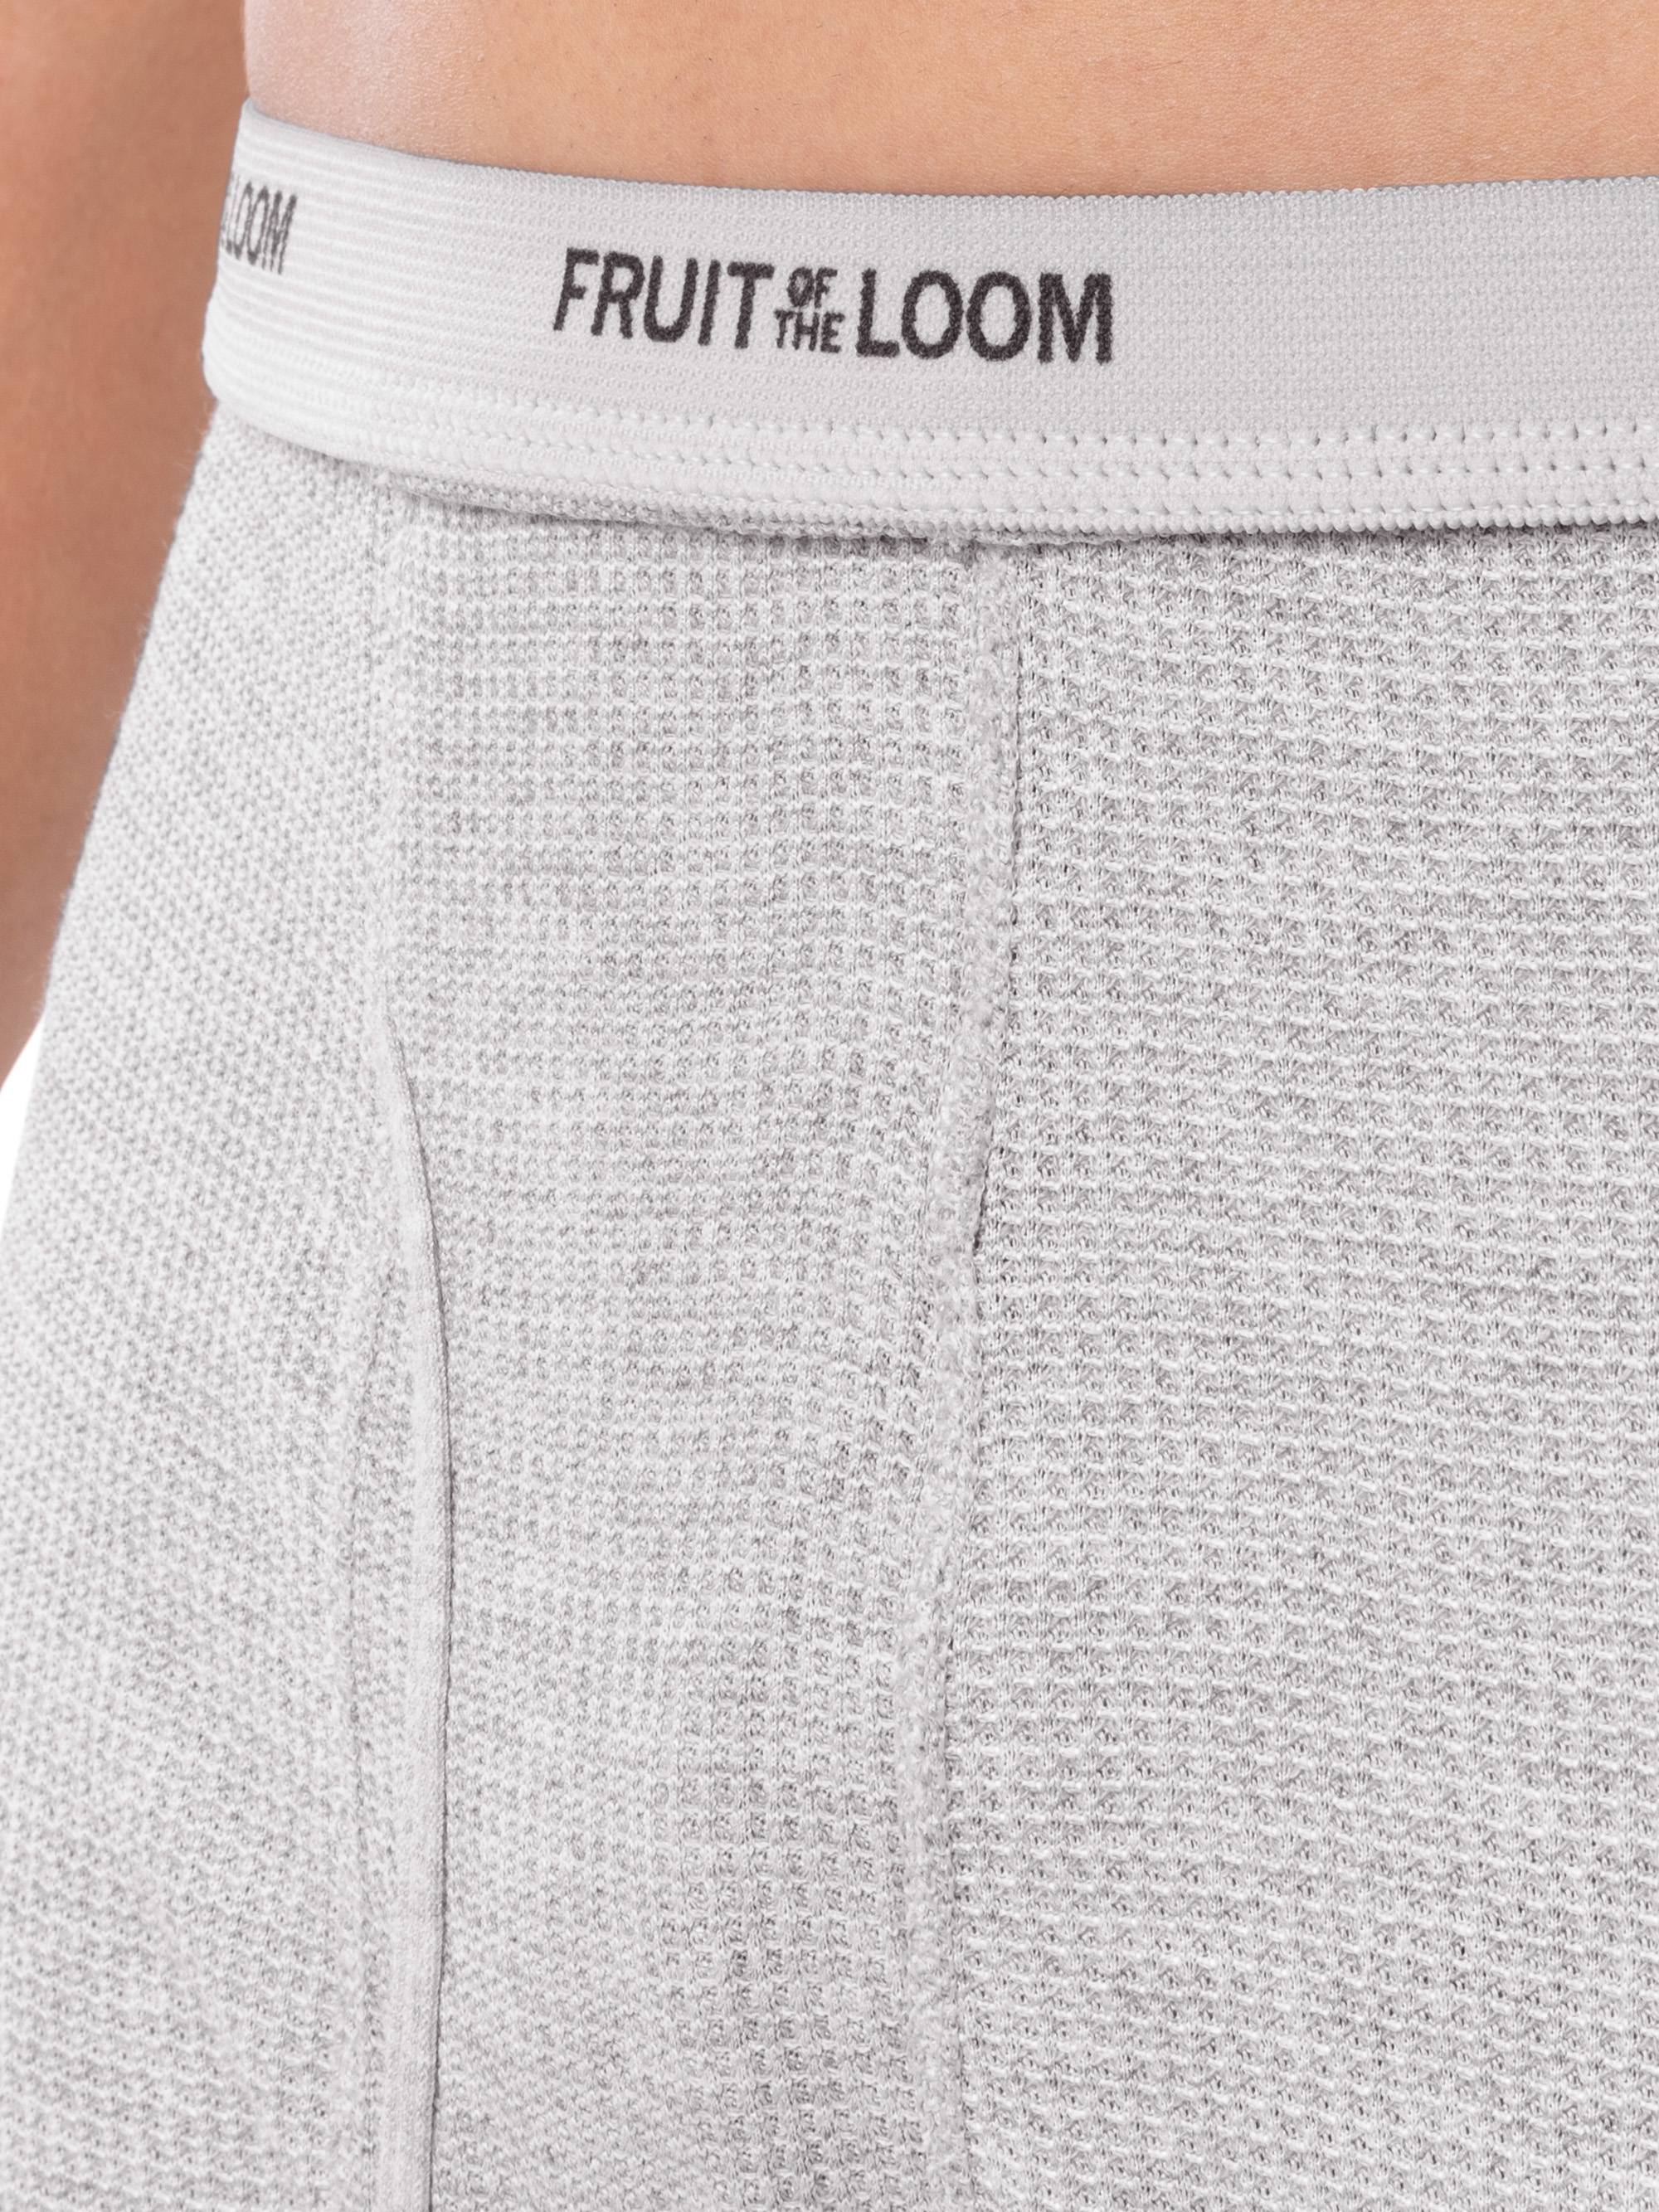 Fruit of the Loom Men's Thermal Waffle Baselayer Underwear Pant - image 4 of 8